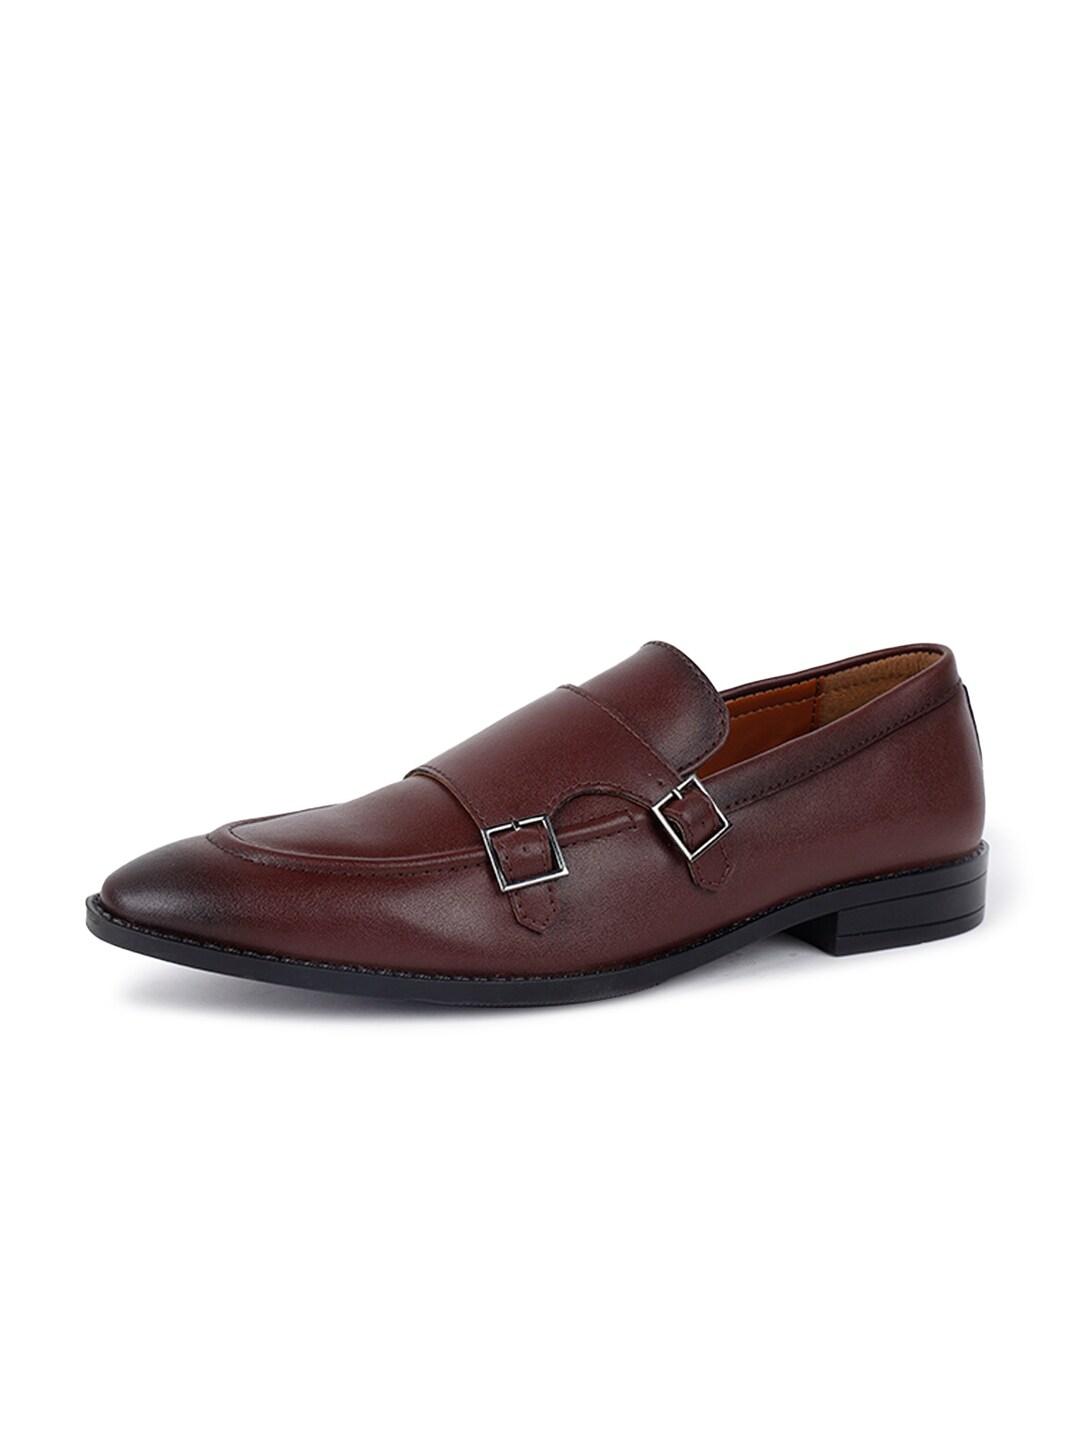 LOUIS STITCH Men Round Toe Leather Formal Monk Shoes